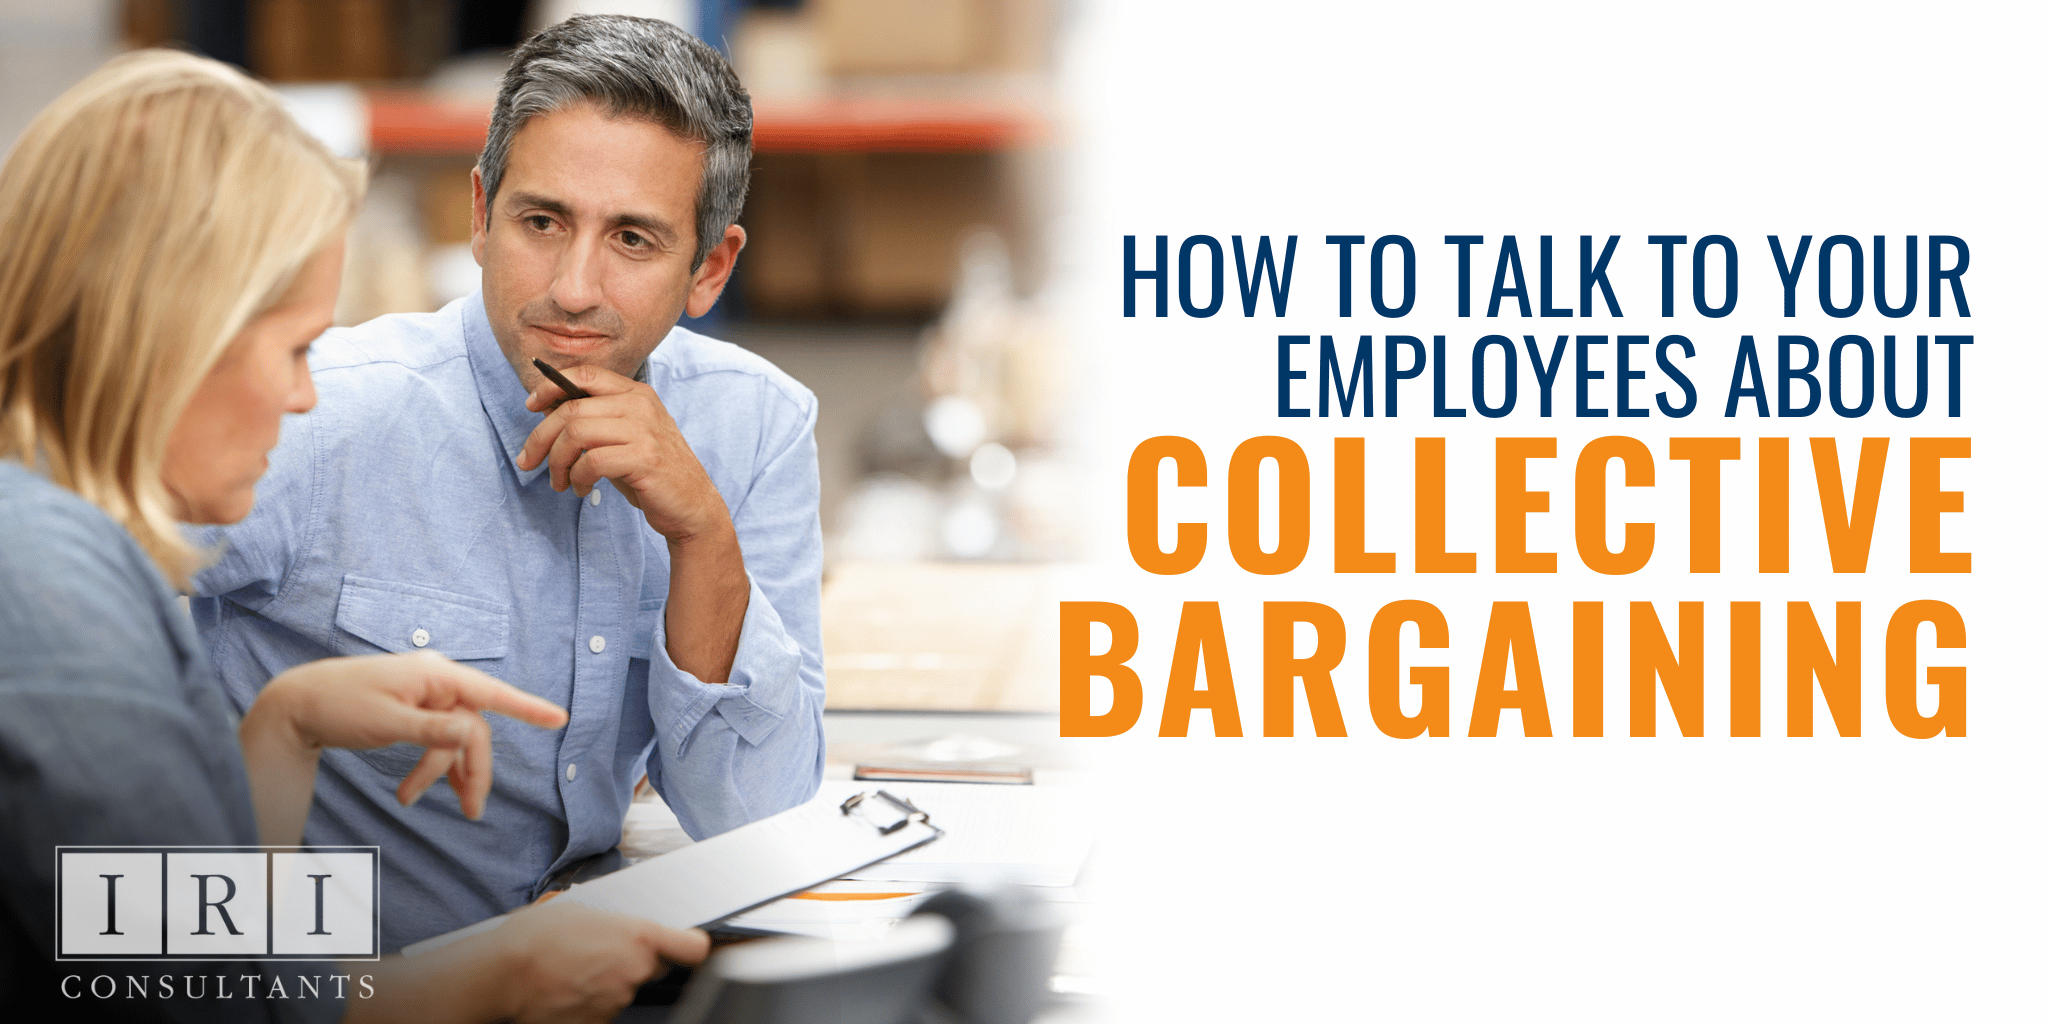 How To Talk To Employees About Collective Bargaining